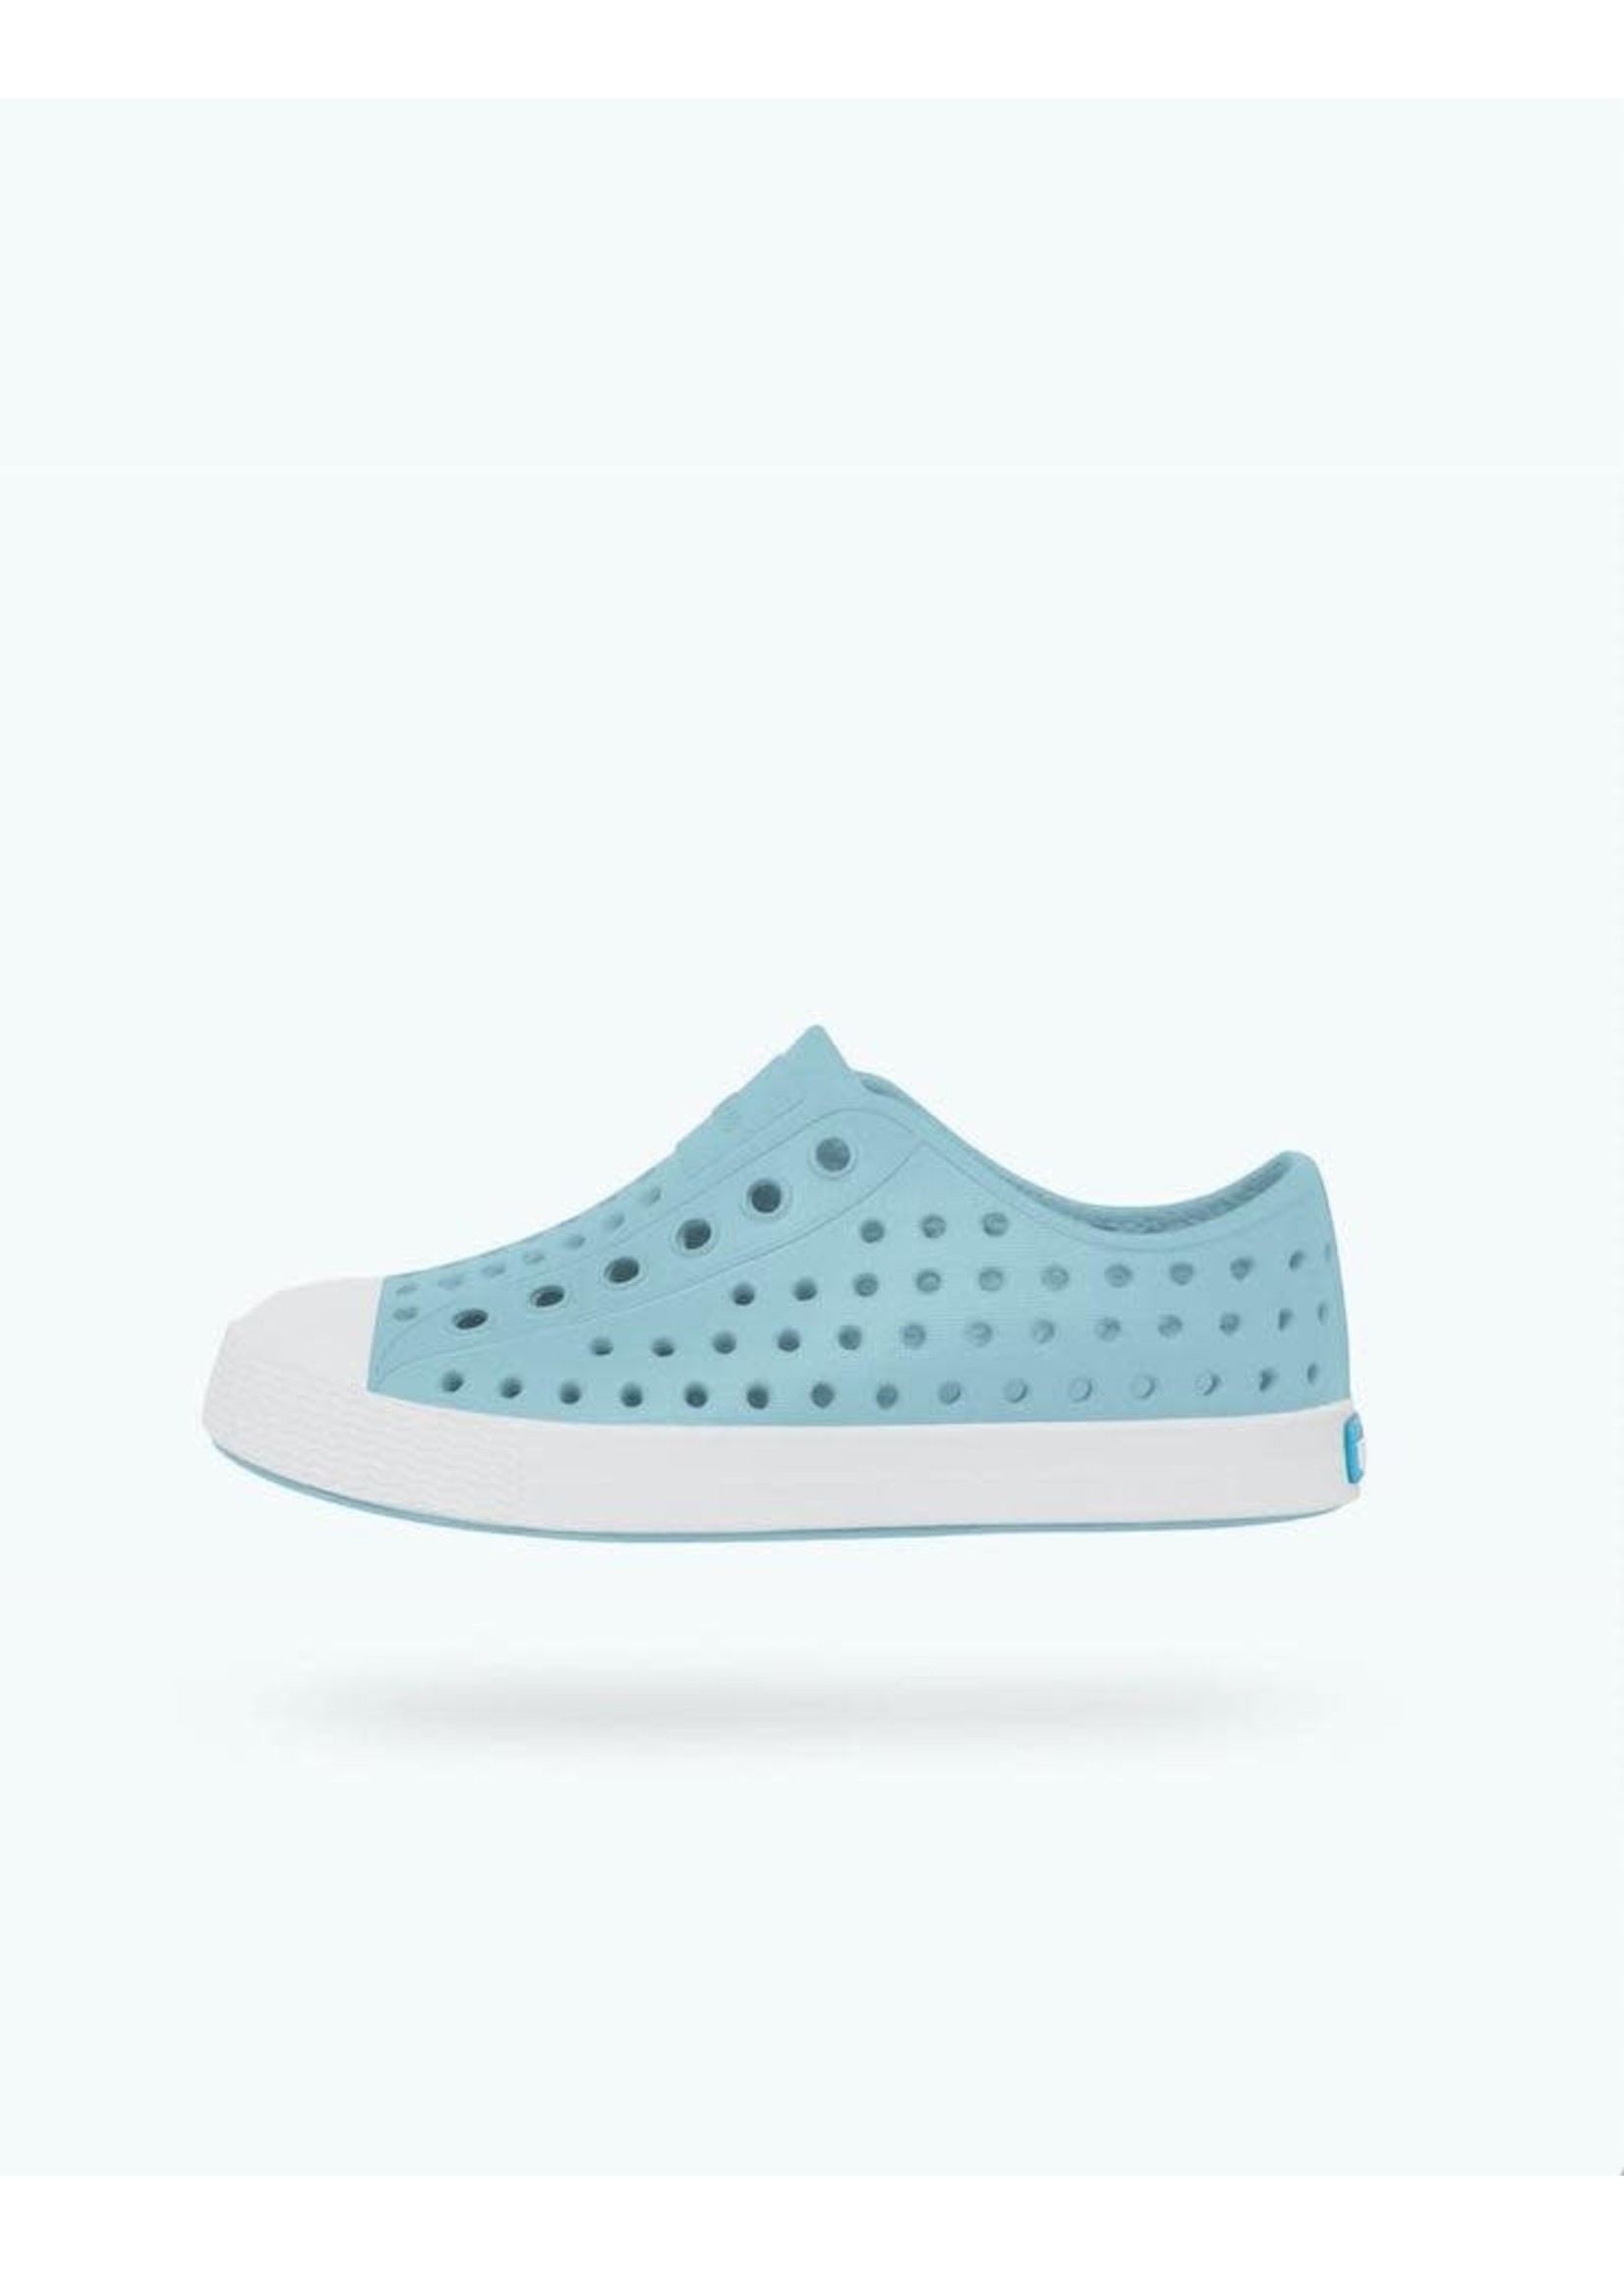 Native Shoes Native Shoes, Jefferson Child in Sky Blue / Shell White